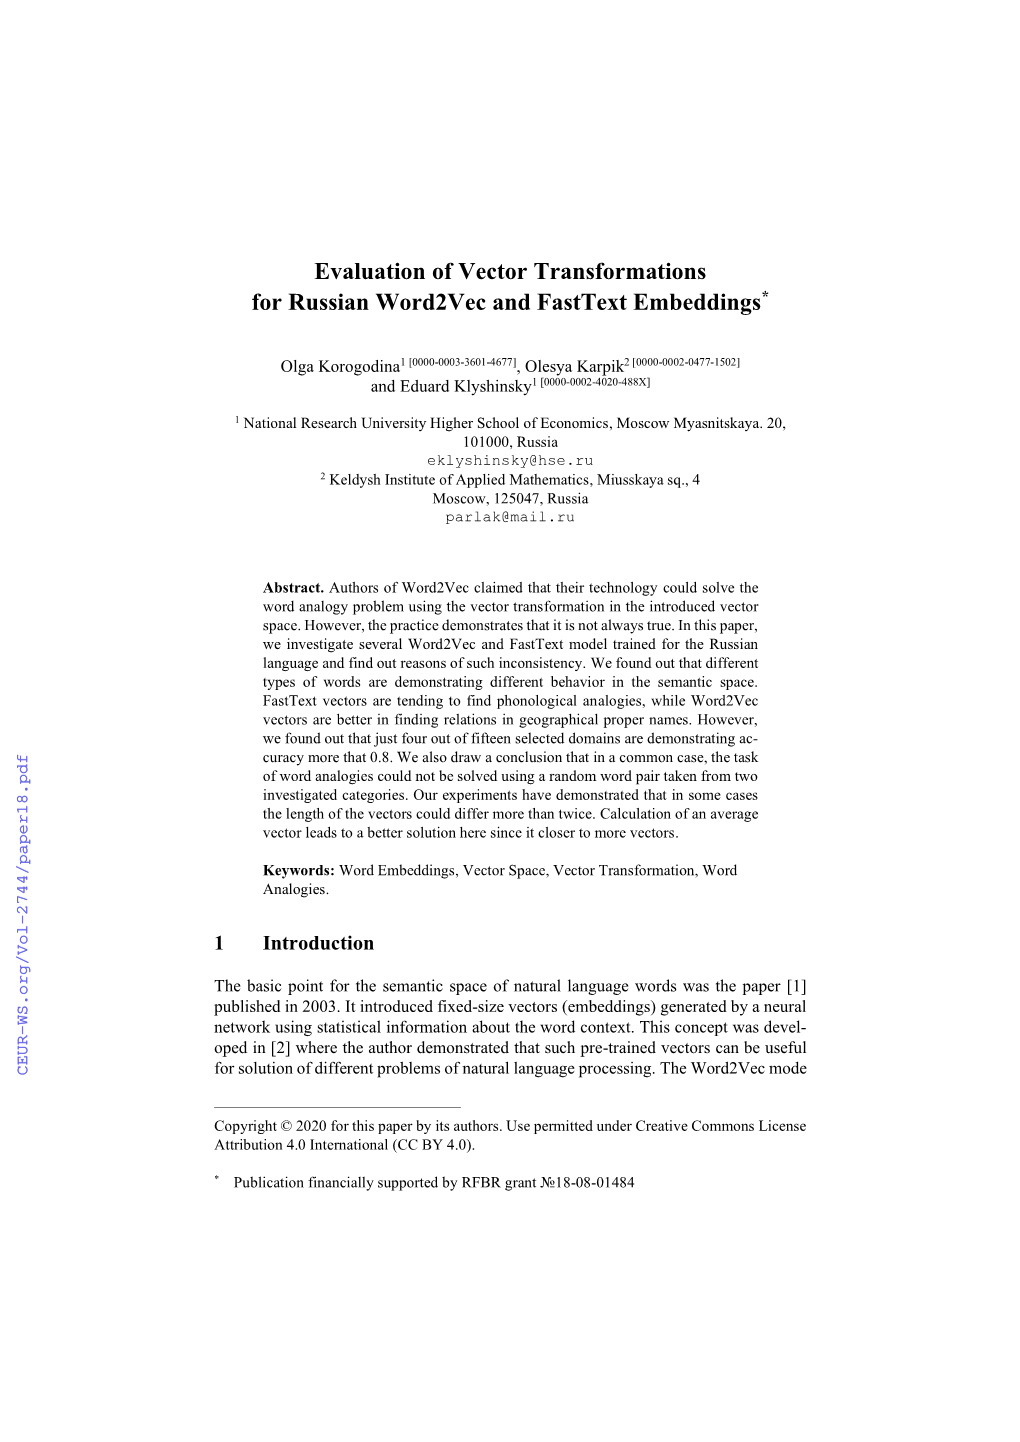 Evaluation of Vector Transformations for Russian Word2vec and Fasttext Embeddings*